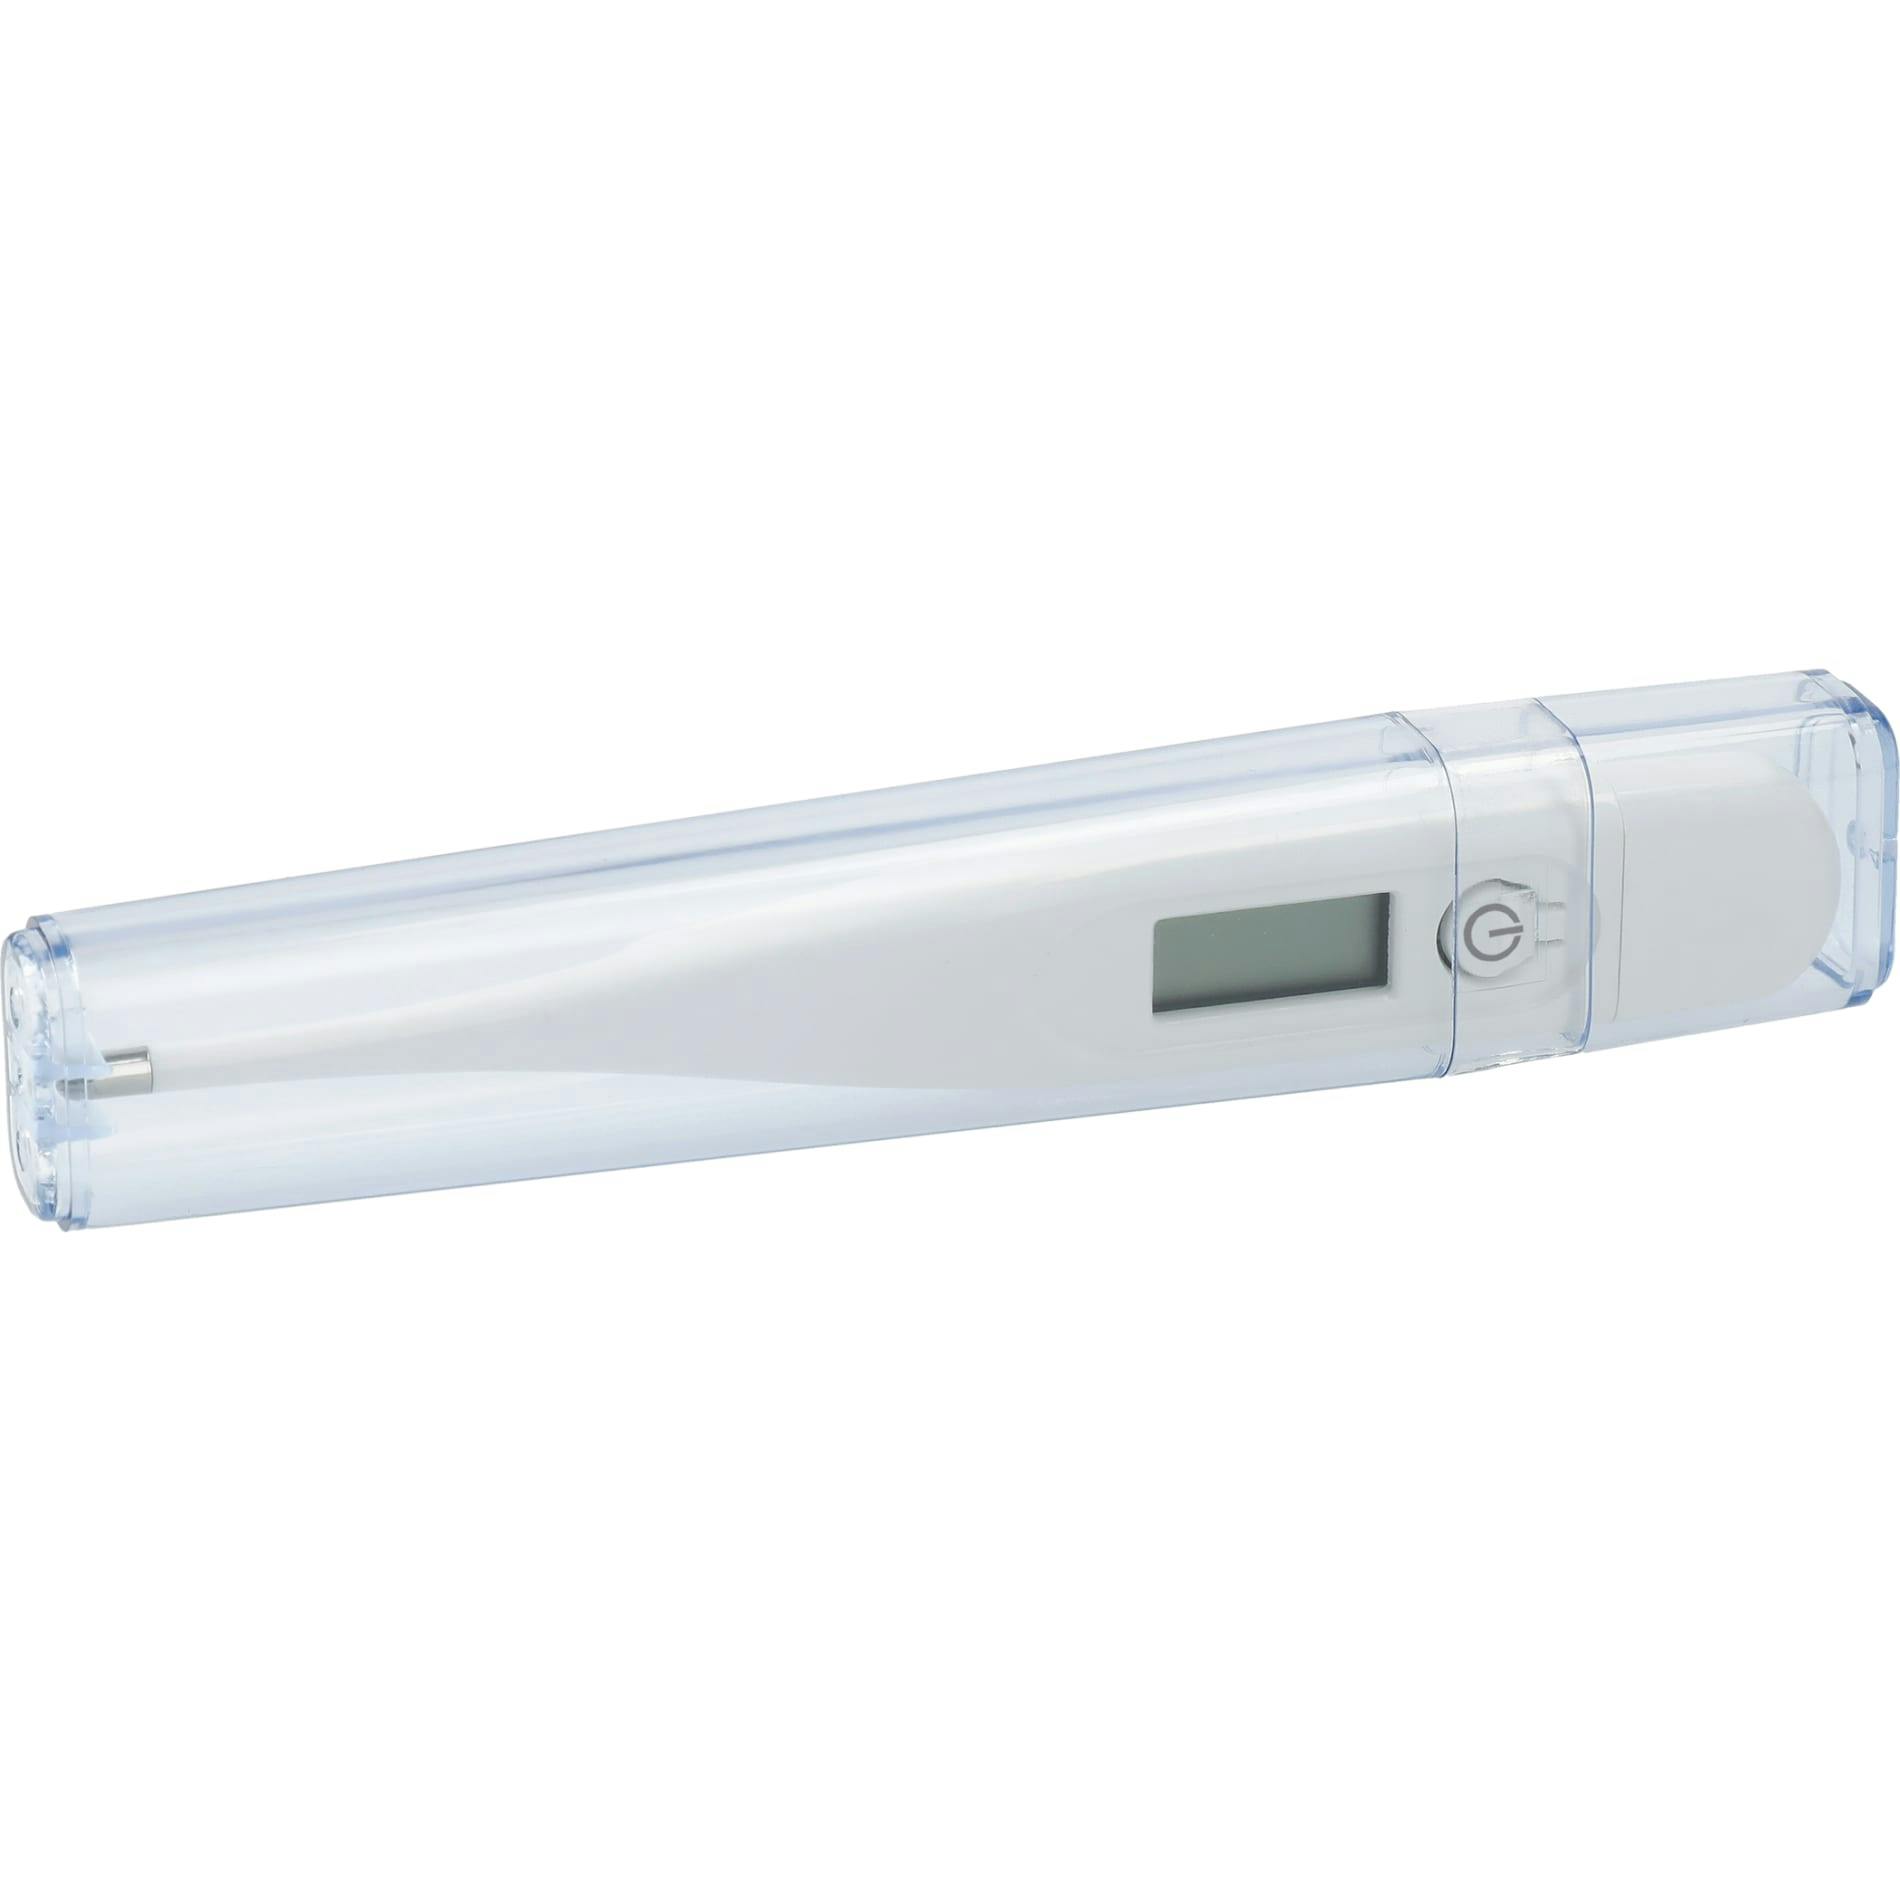 Digital Thermometer - additional Image 2